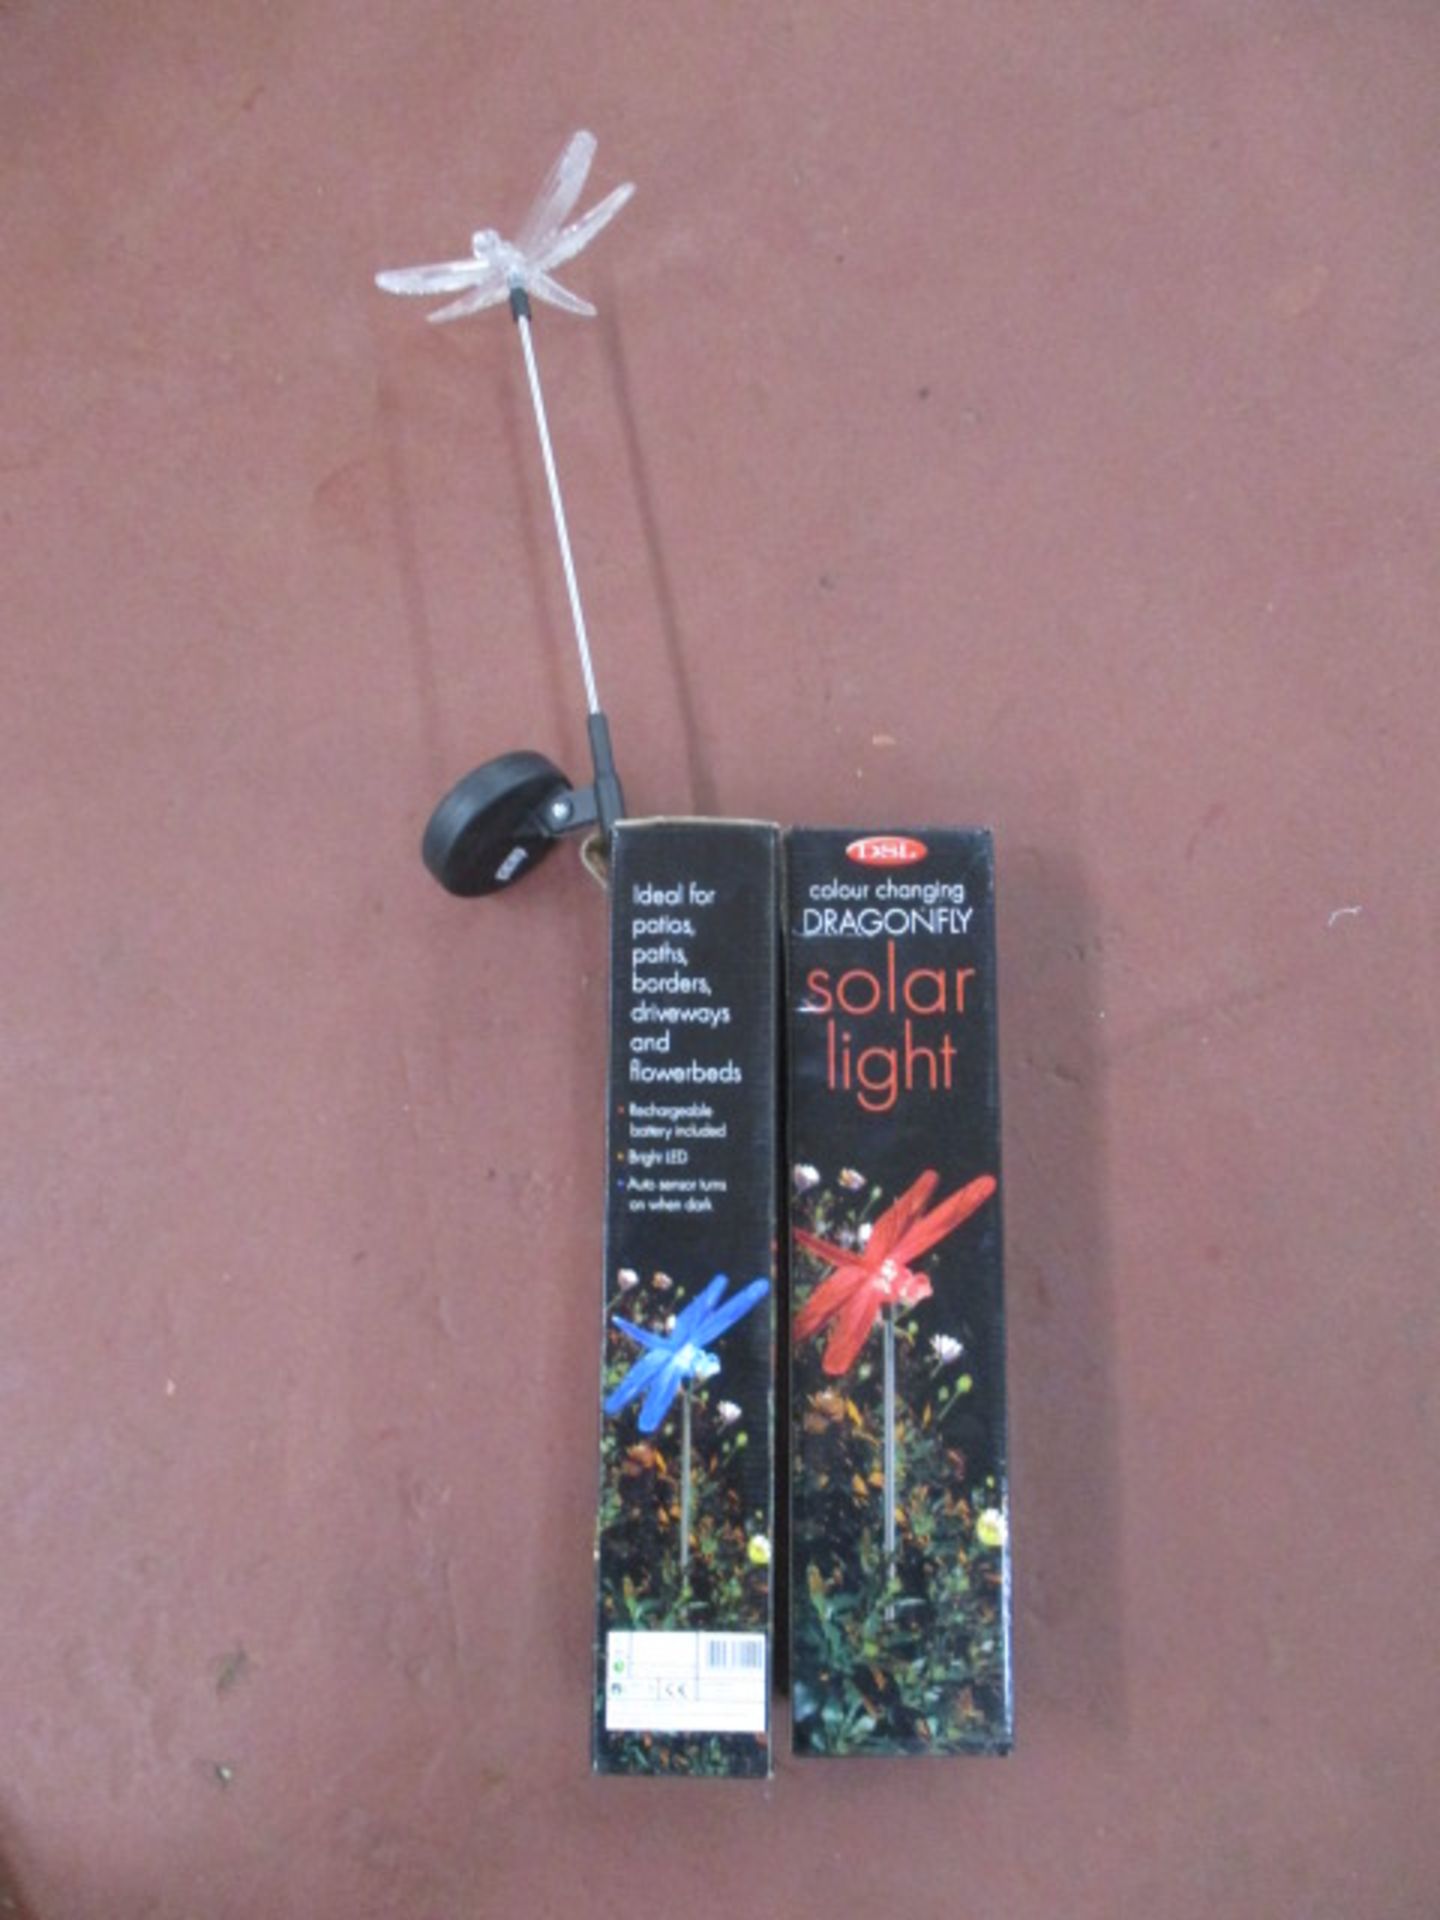 100 x Solar Colour Changing Dragonfly Light - Image 3 of 3